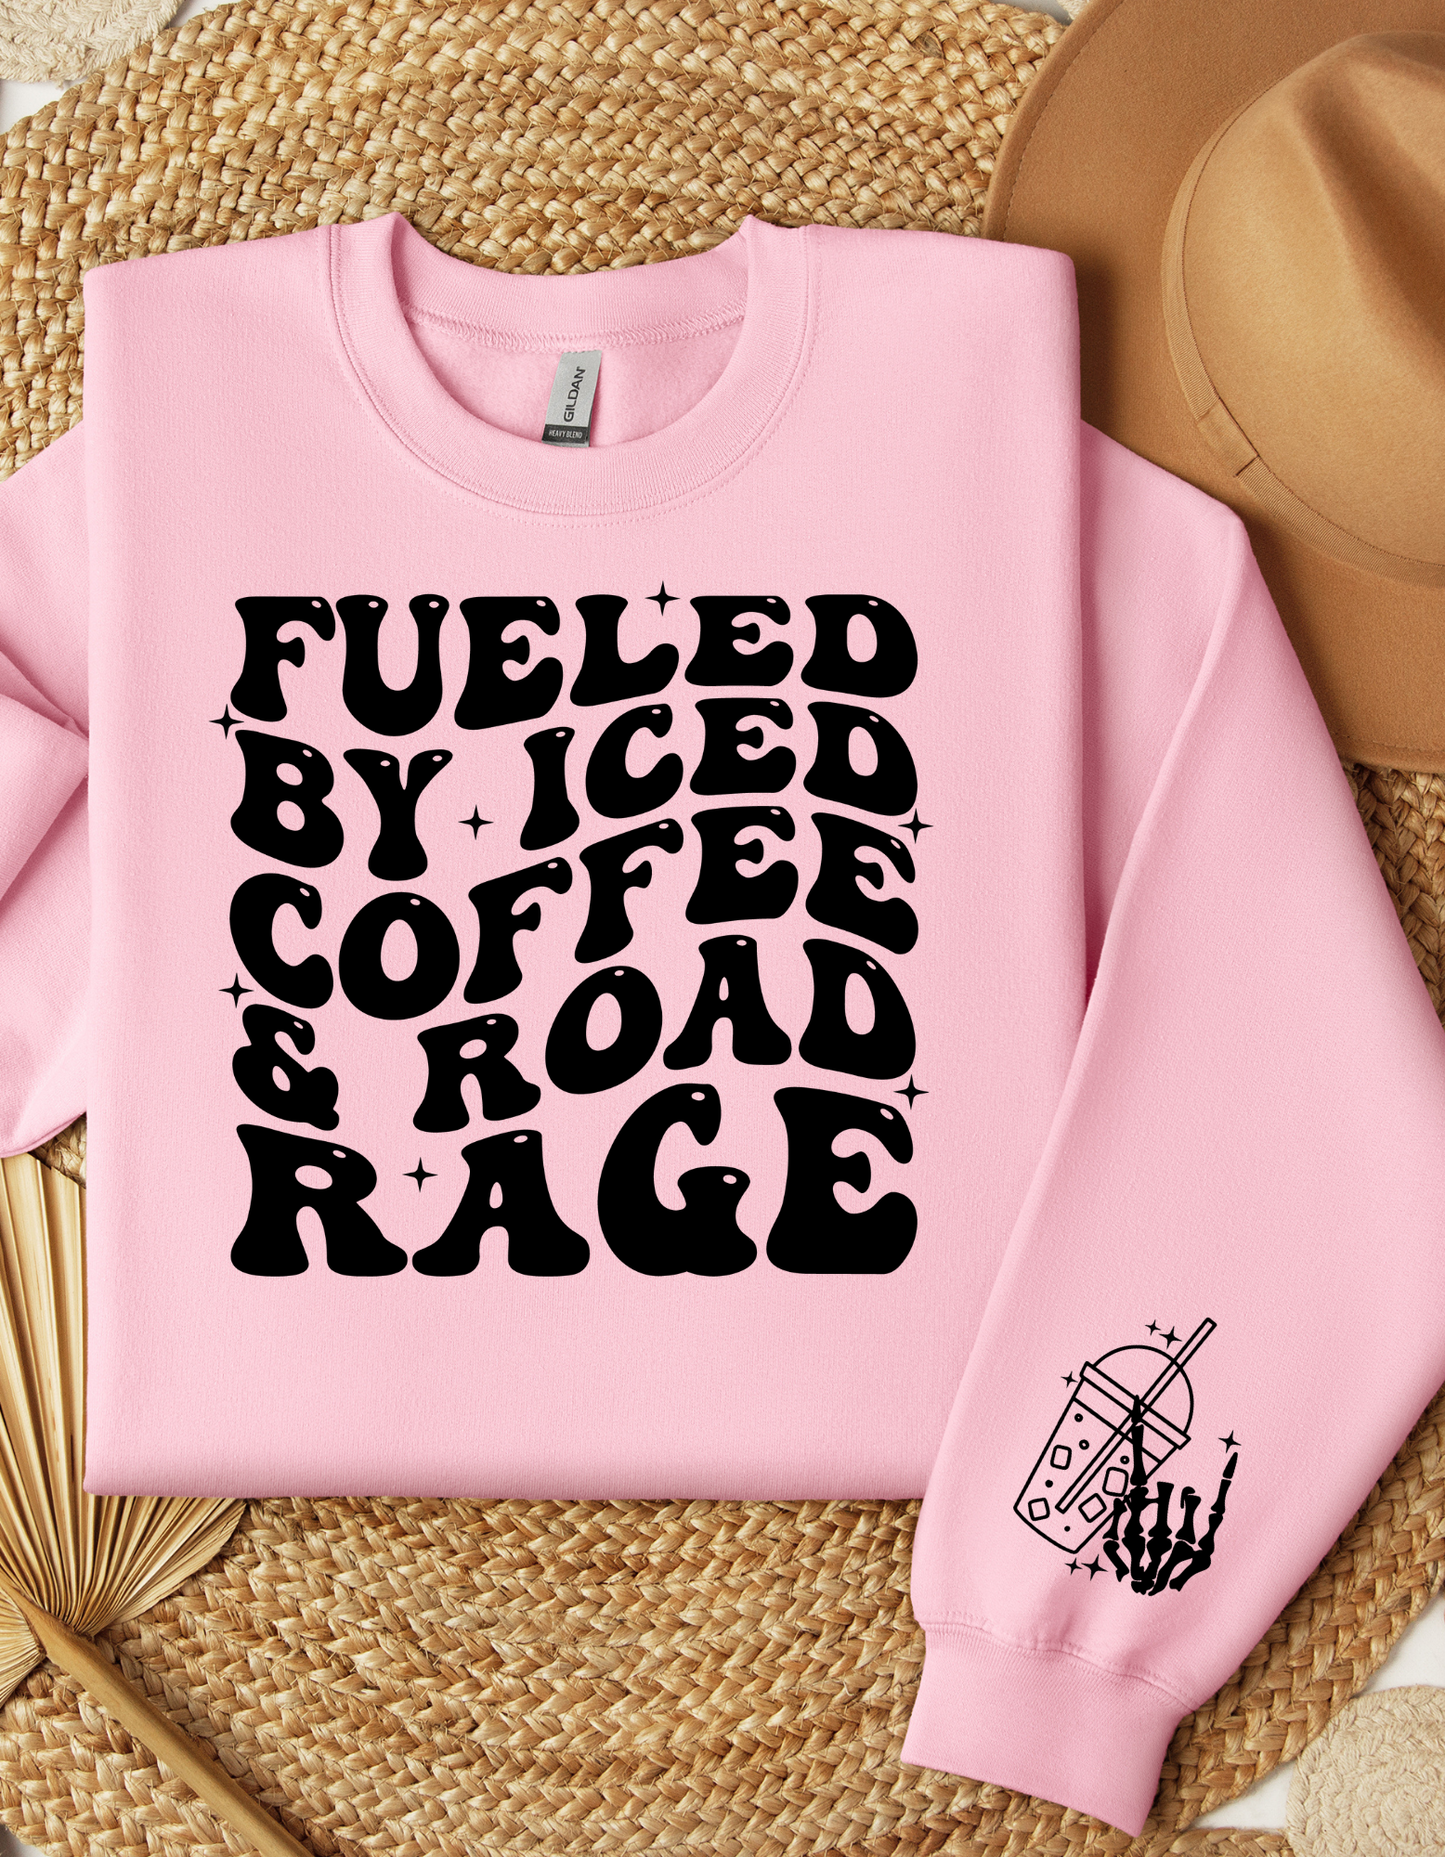 FUELED BY ICED COFFE AND ROAD RAGE POCKET AND FULL SIZE SINGLE COLOR